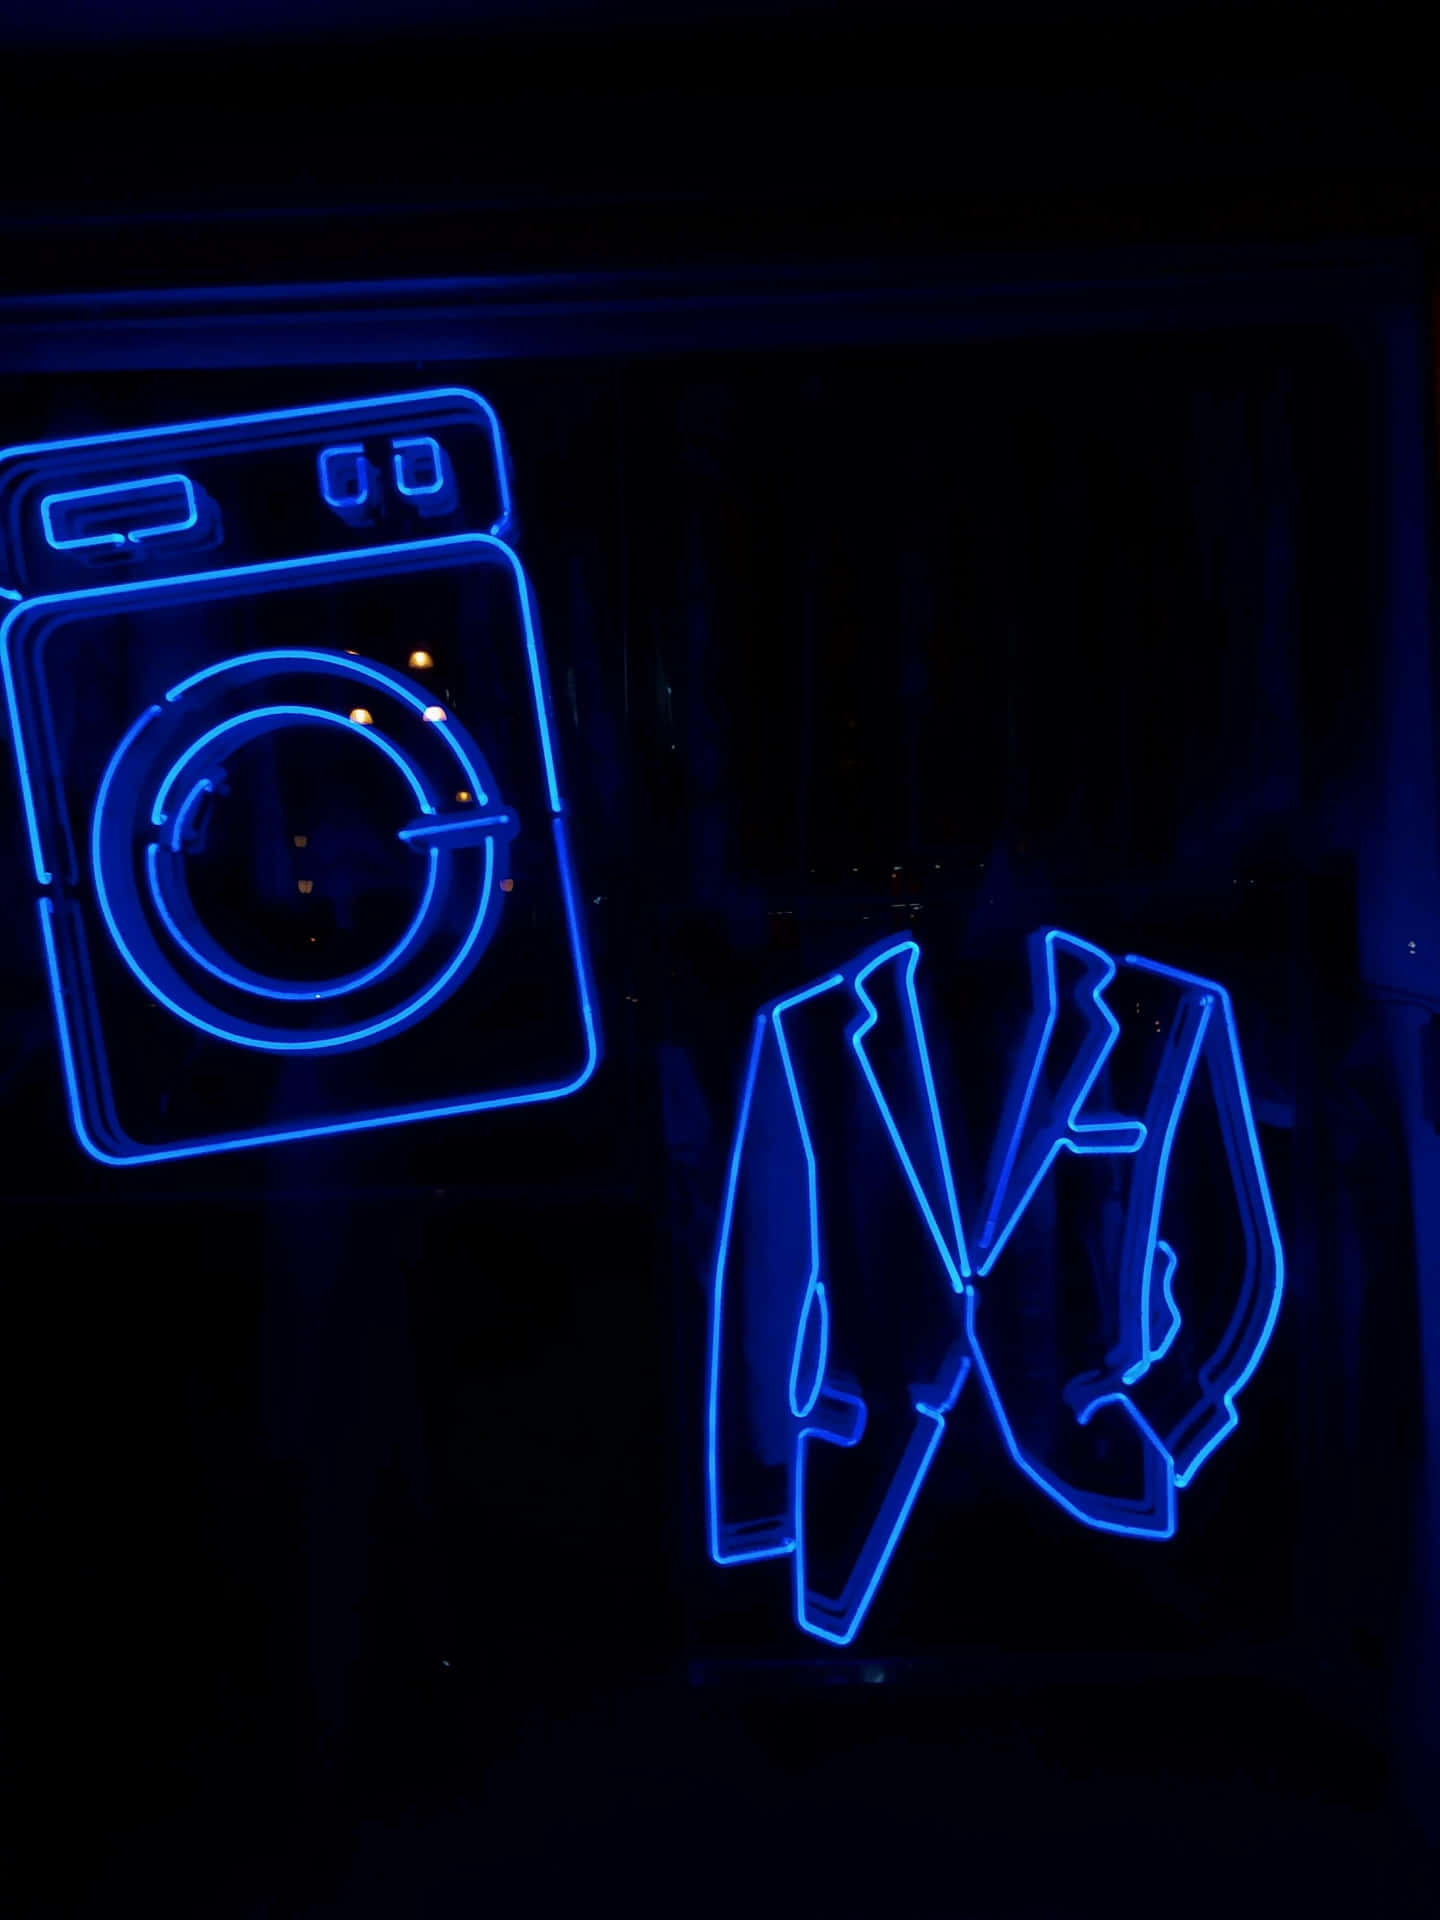 Electric Blue Laundry Neon Signs Wallpaper